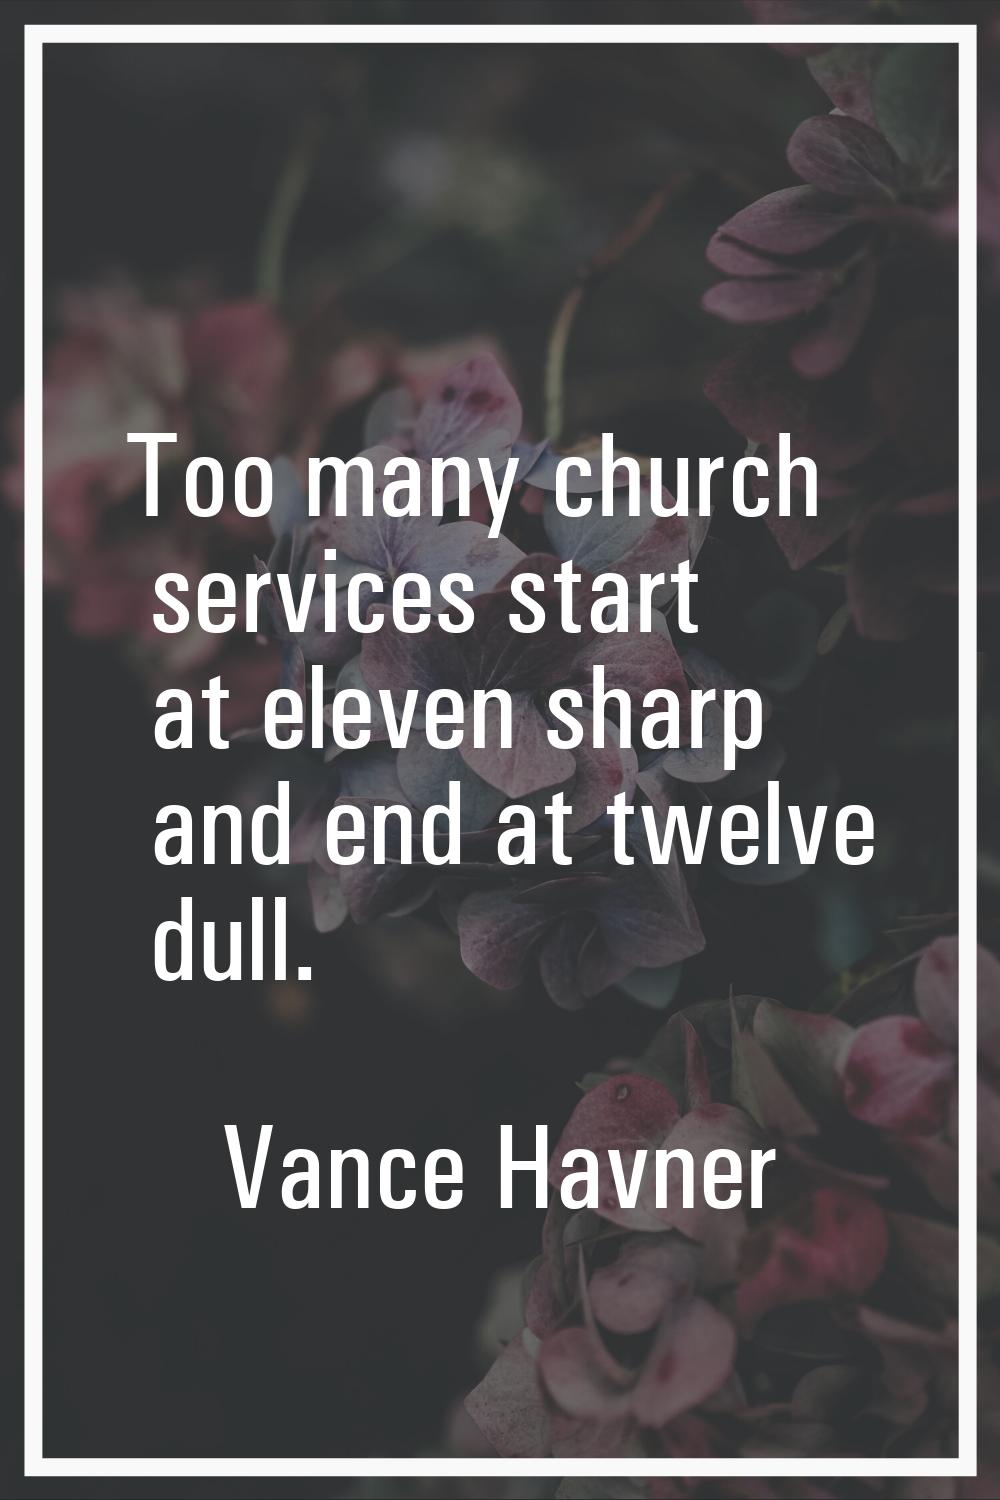 Too many church services start at eleven sharp and end at twelve dull.